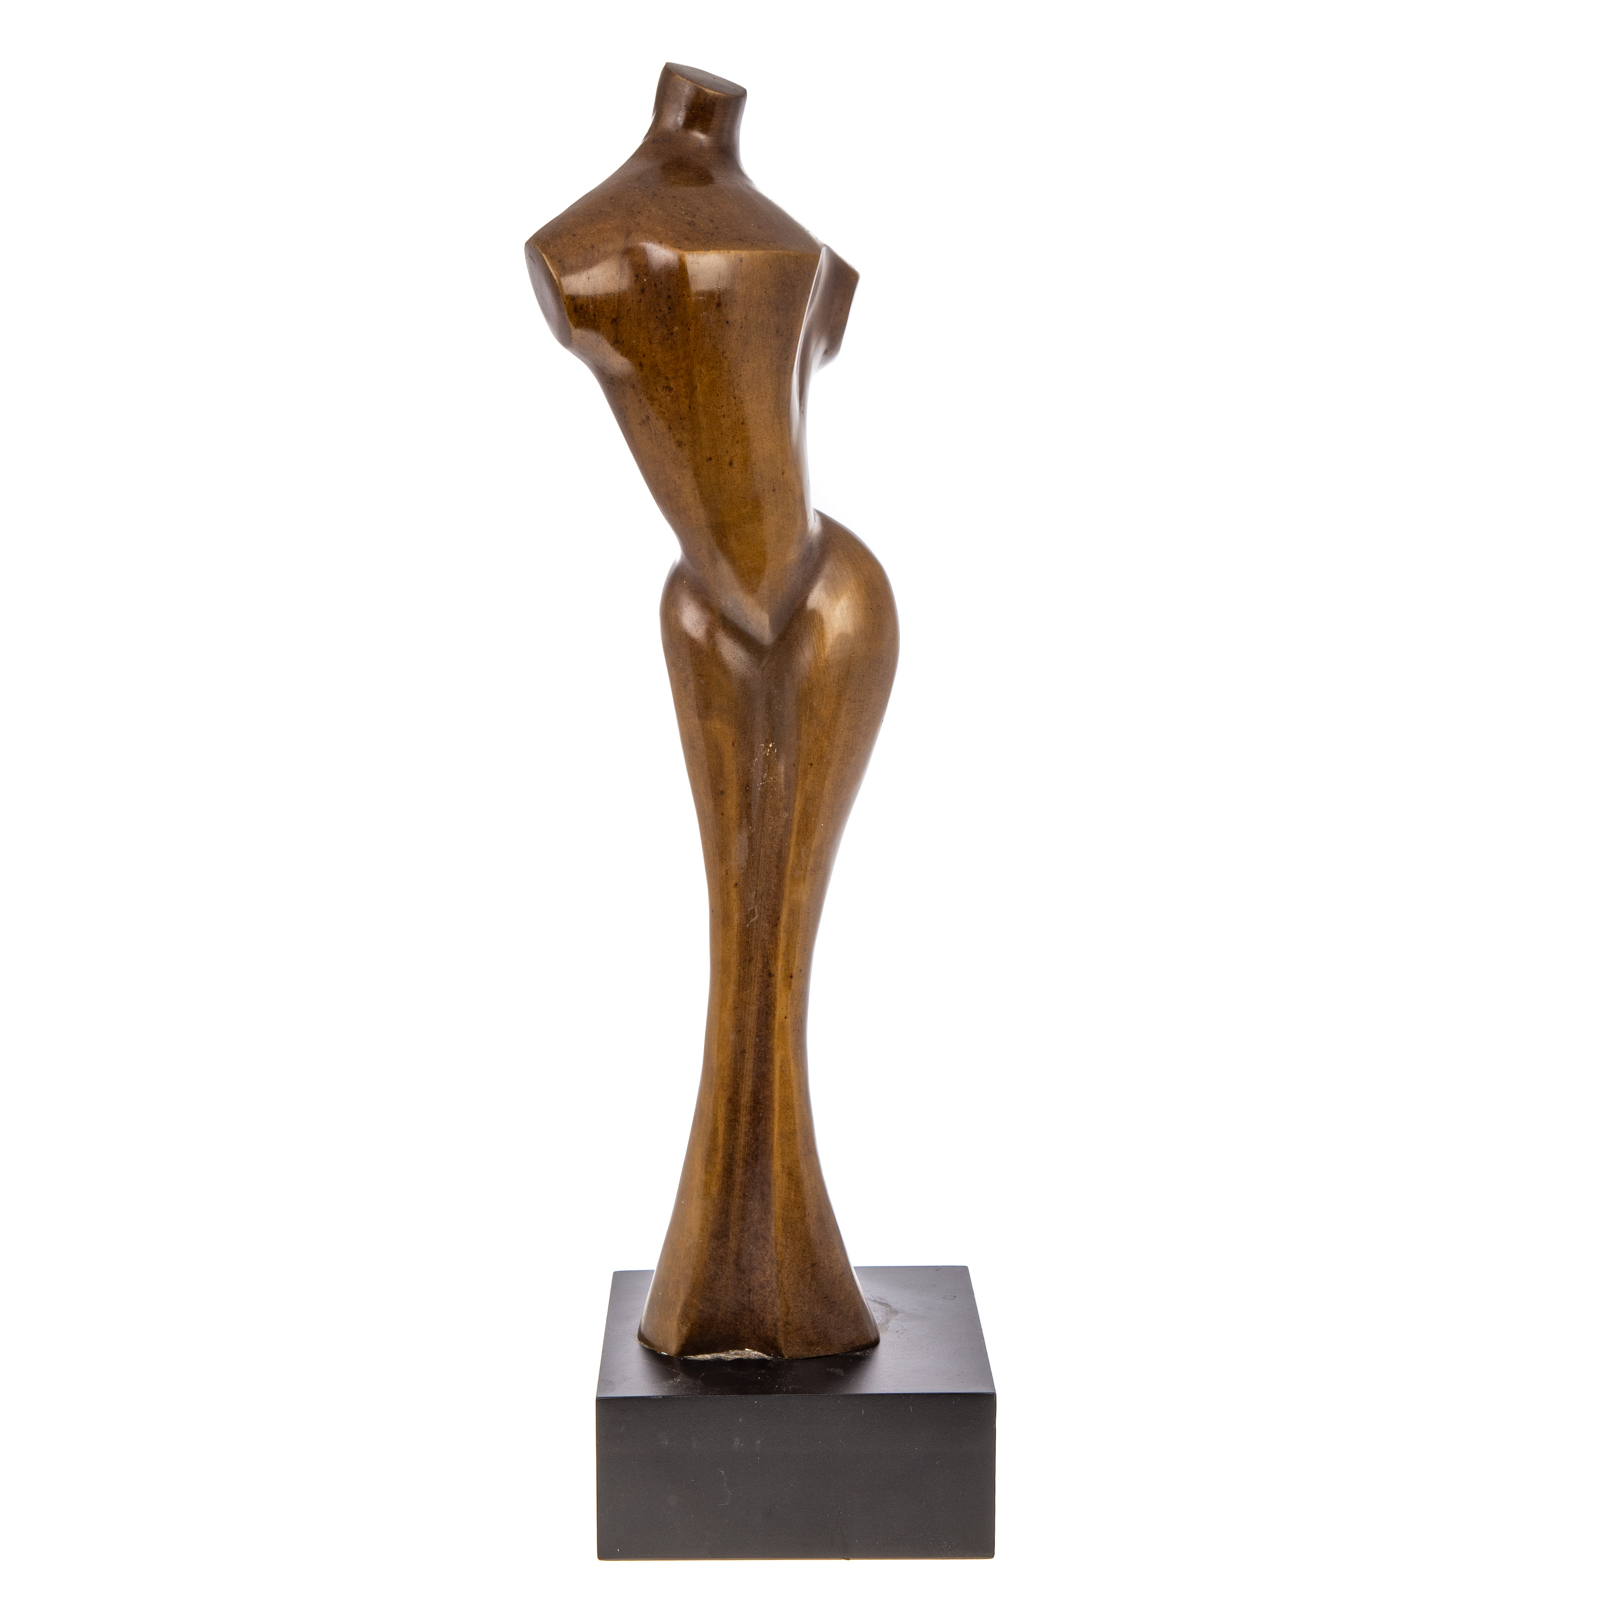 20TH CENTURY. ABSTRACT FEMALE SCULPTURE,